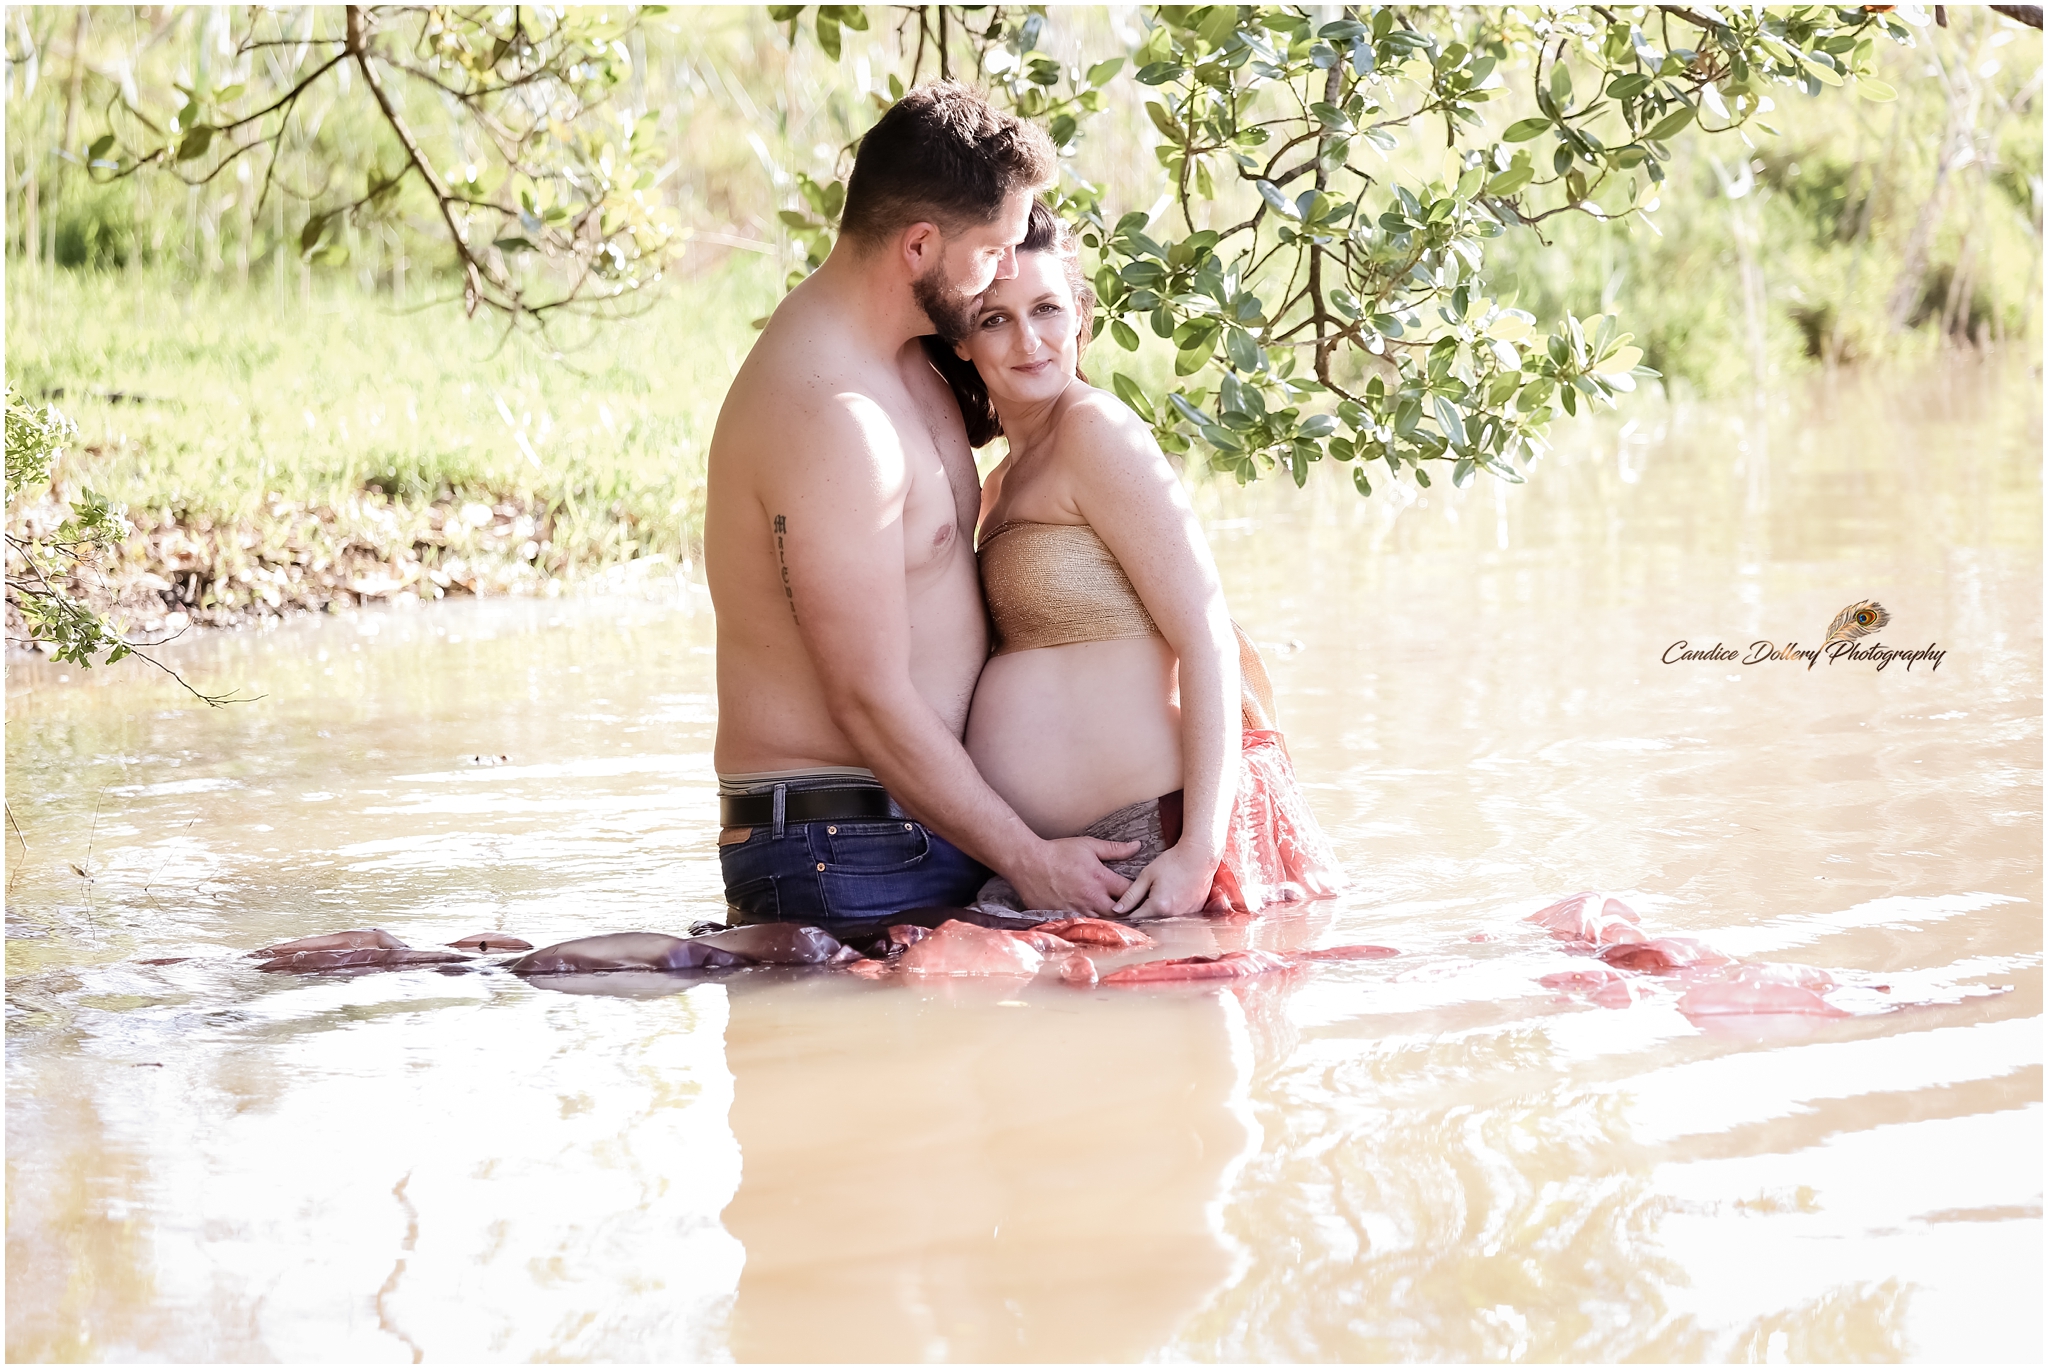 kirstys-maternity-candice-dollery-photography_1824